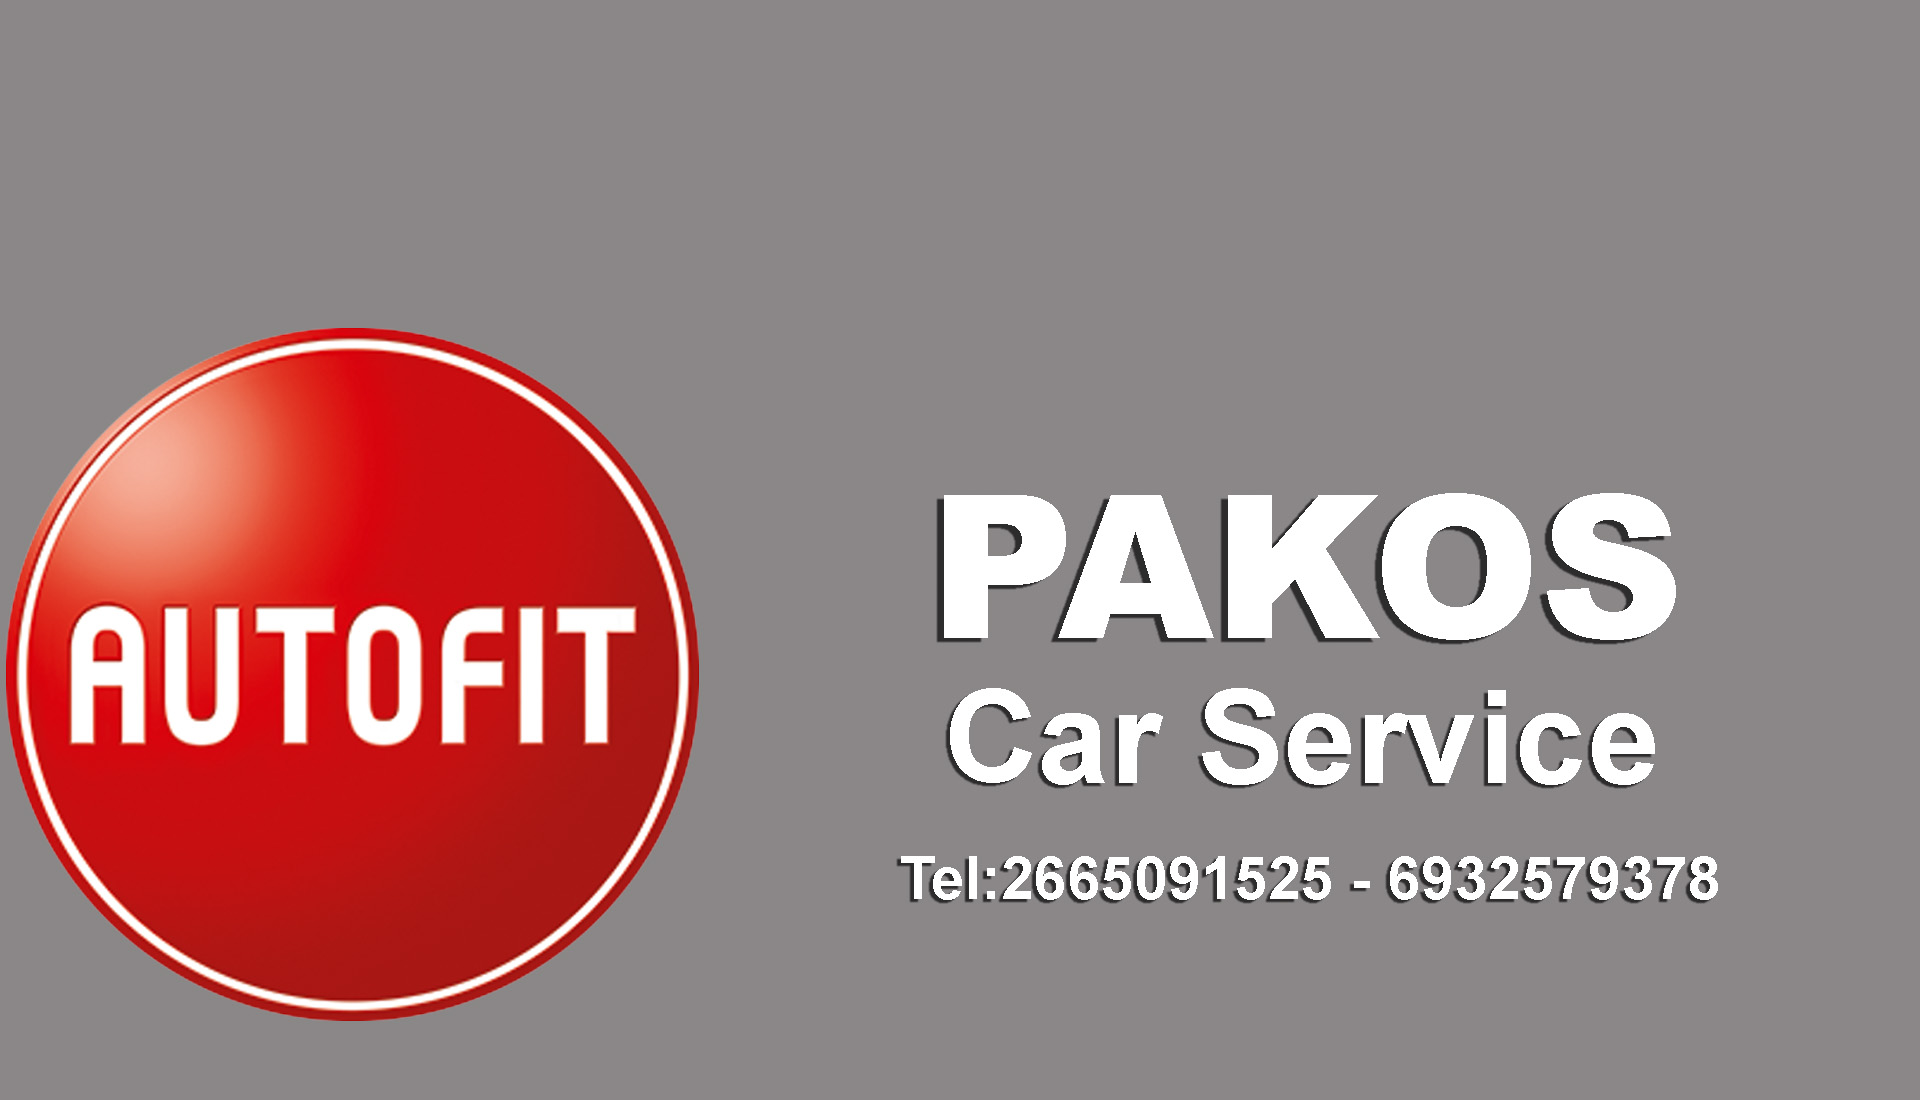 Pakos Autofit! Engine check, oil change, tires, shock absorbers and everything else your car needs!